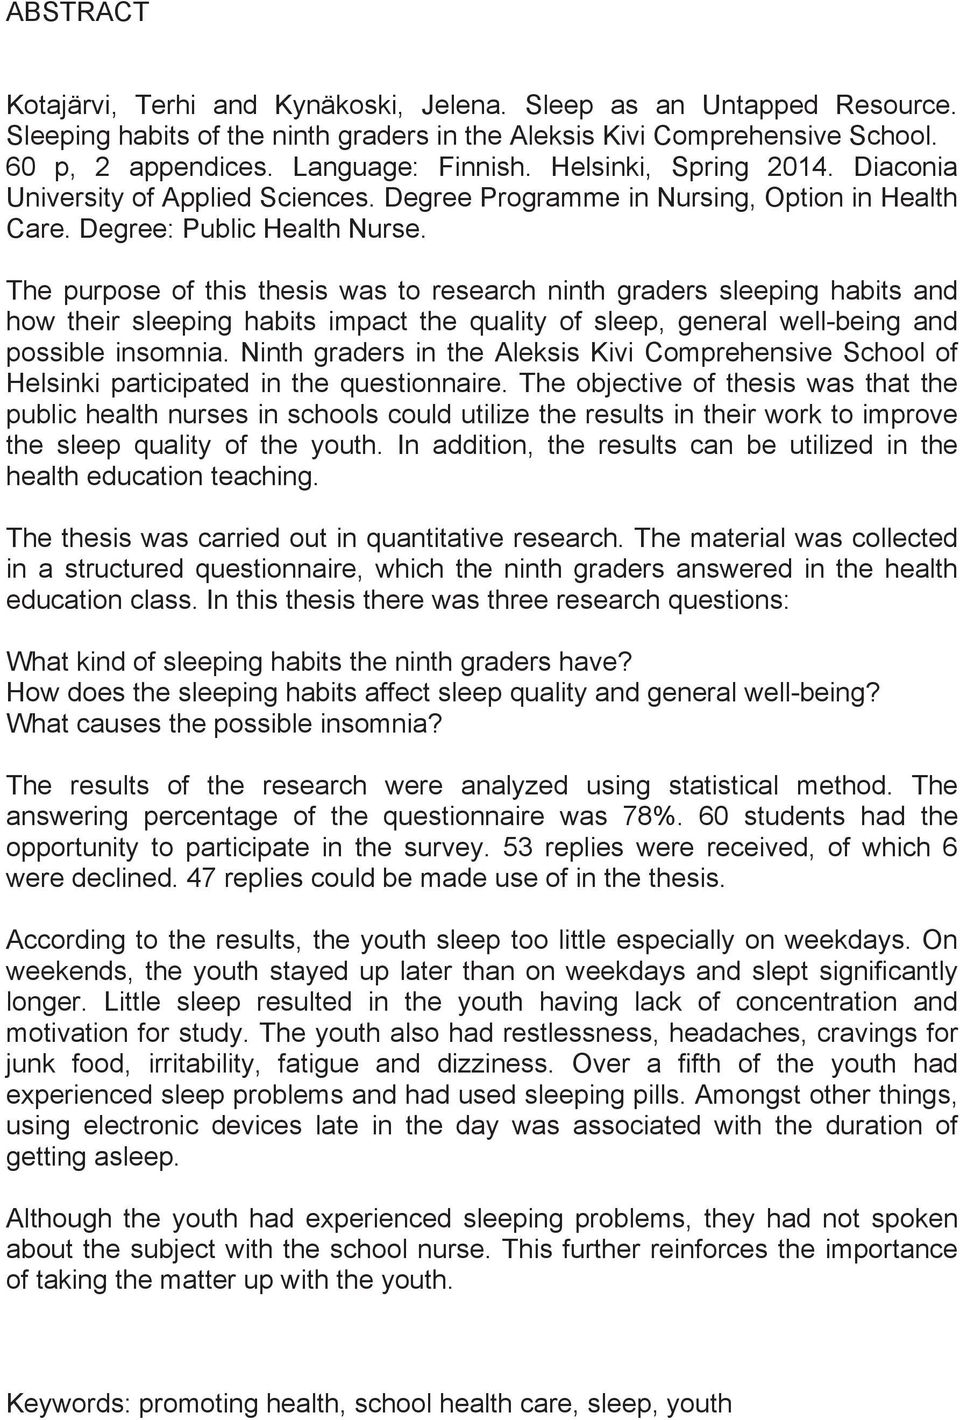 The purpose of this thesis was to research ninth graders sleeping habits and how their sleeping habits impact the quality of sleep, general well-being and possible insomnia.